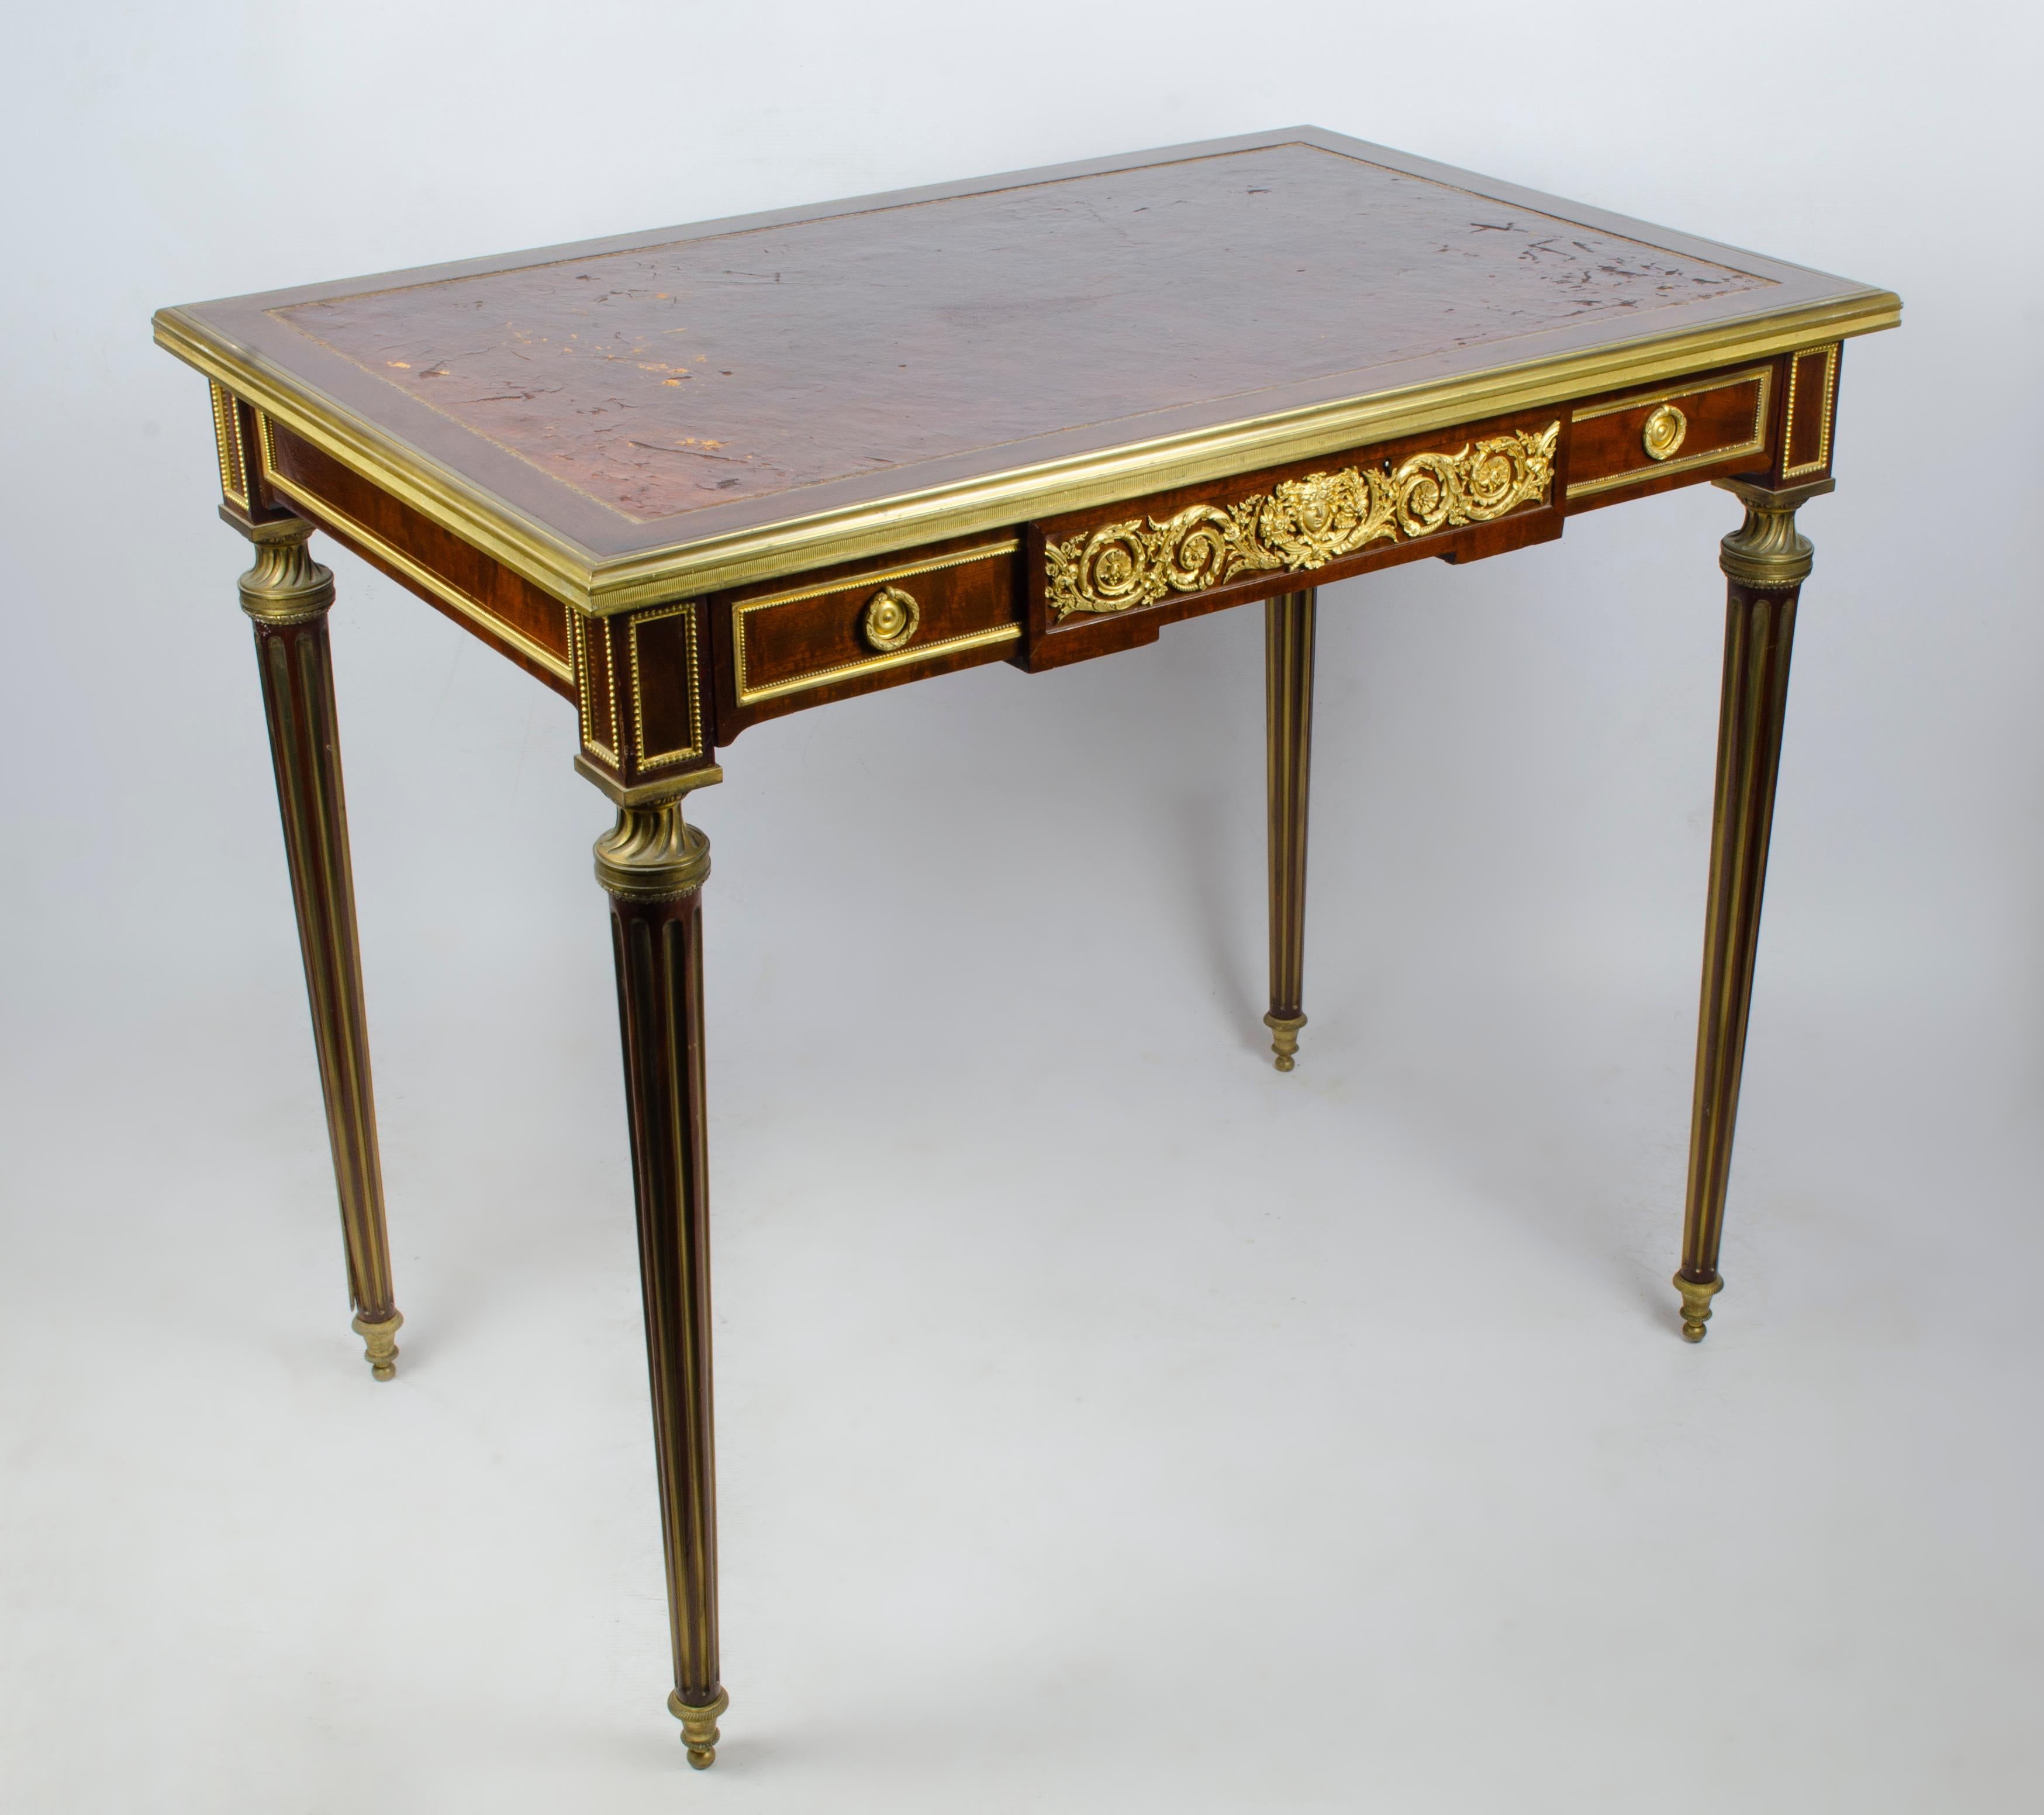 Elegant Louis XVI style desk made by Paul Sormani (1817-1877). Made of veneered wood and gilt bronze sheathed on top of a patiné havane leather. Molded and decorated on all sides with rich gilt bronze ornamentation, it contains a large drawer